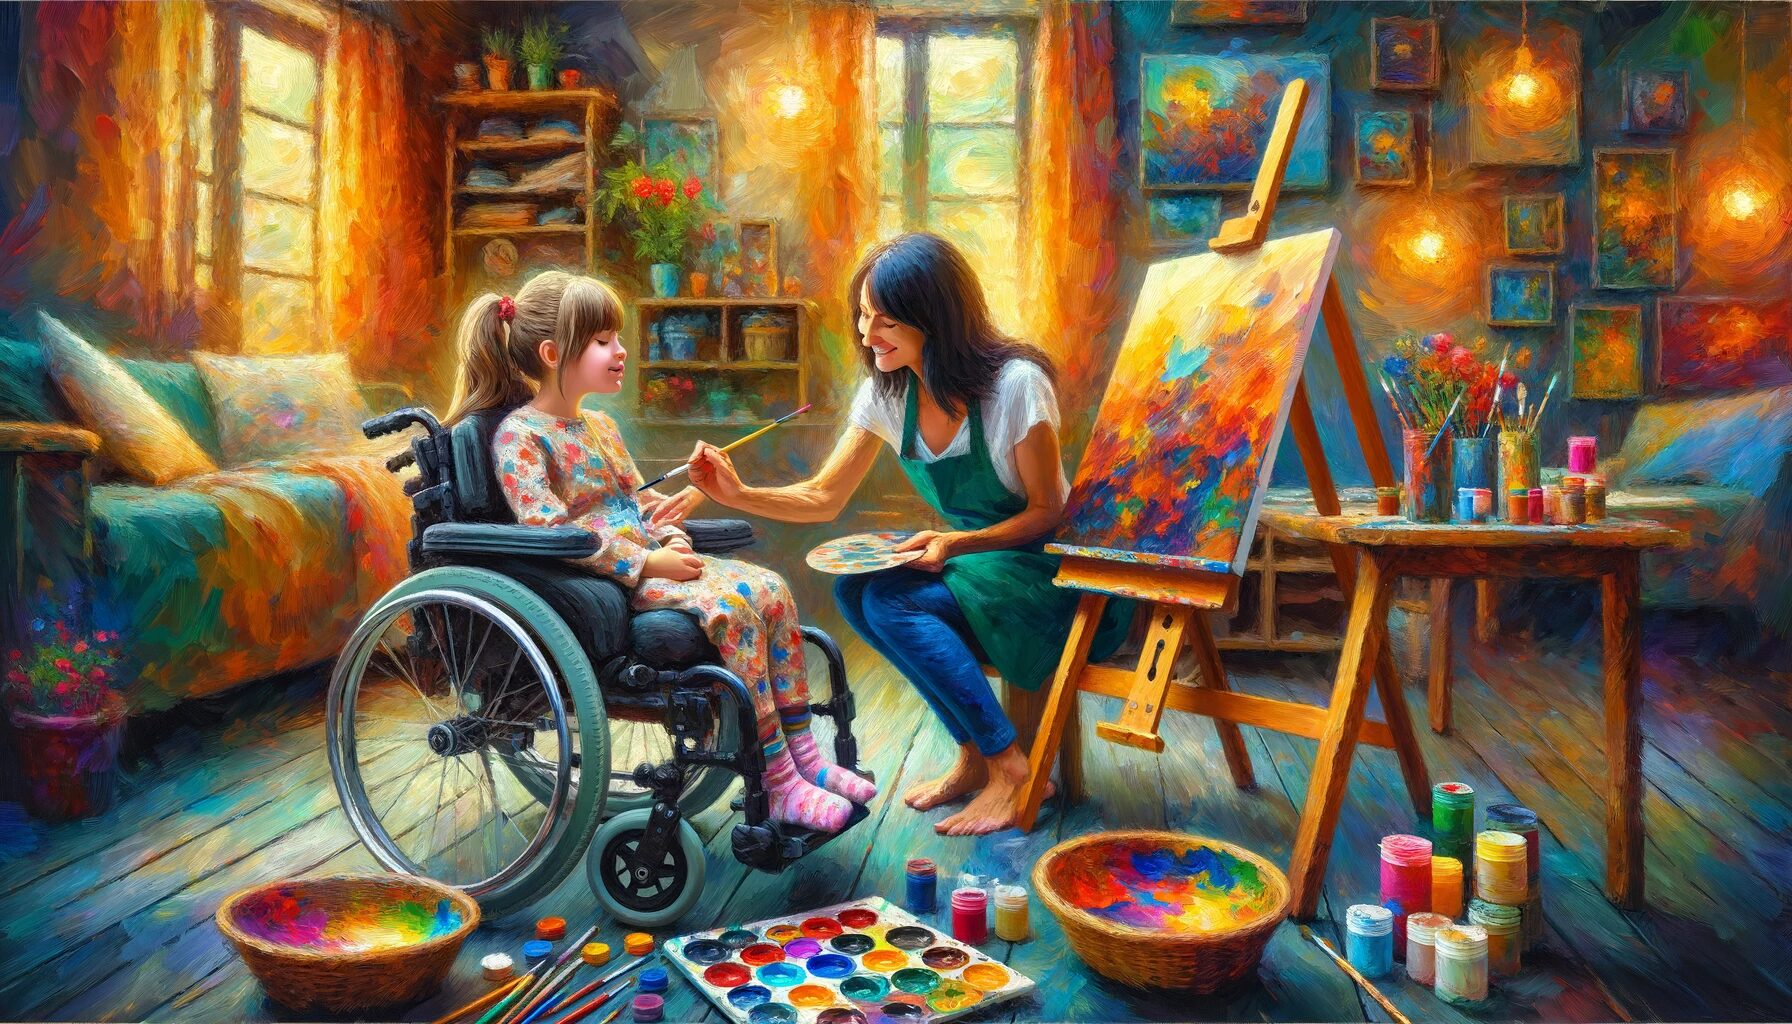 A painting of a parent teaching their child with a disability to paint, in a cozy home studio, the child in a wheel chair is adorned with colorful stickers